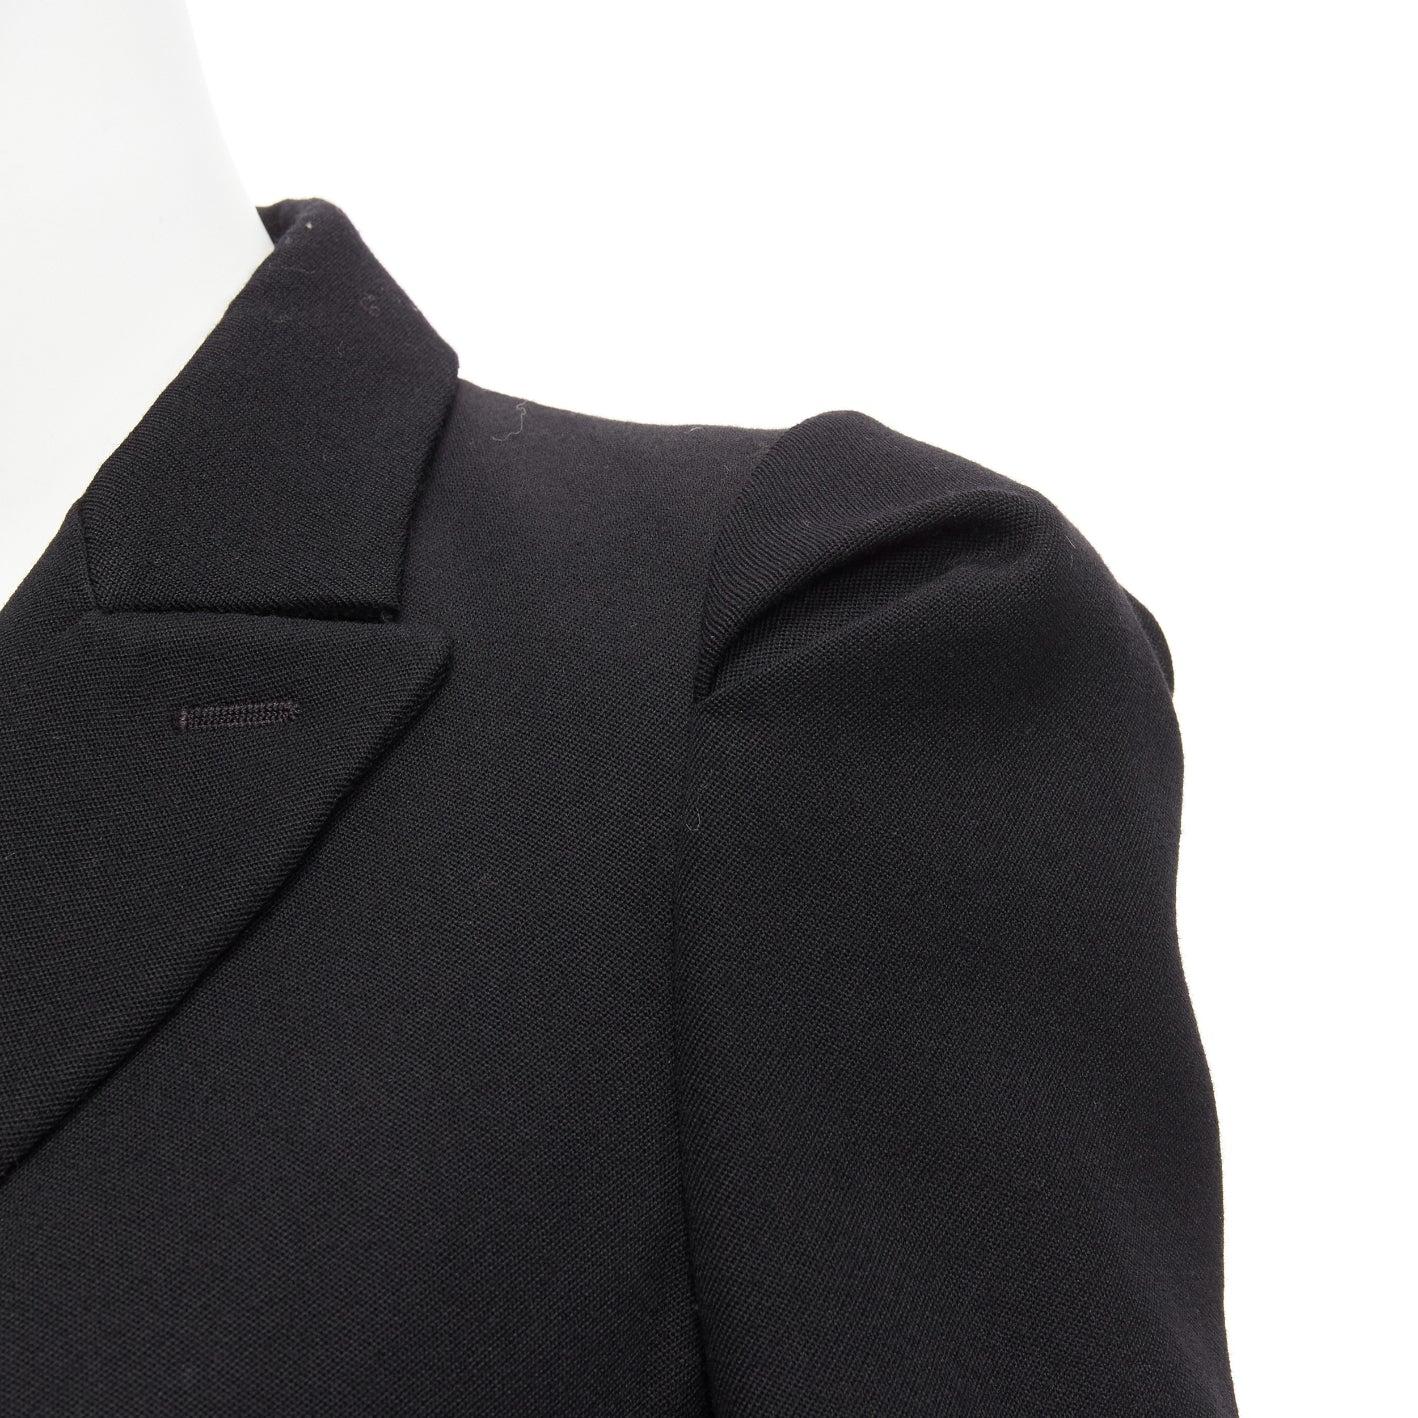 PRADA 2009 black virgin wool puffed shoulder fitted formal blazer IT38 XS
Reference: NKLL/A00182
Brand: Prada
Designer: Miuccia Prada
Collection: 2009
Material: Virgin Wool
Color: Black
Pattern: Solid
Closure: Button
Lining: Black Fabric
Extra